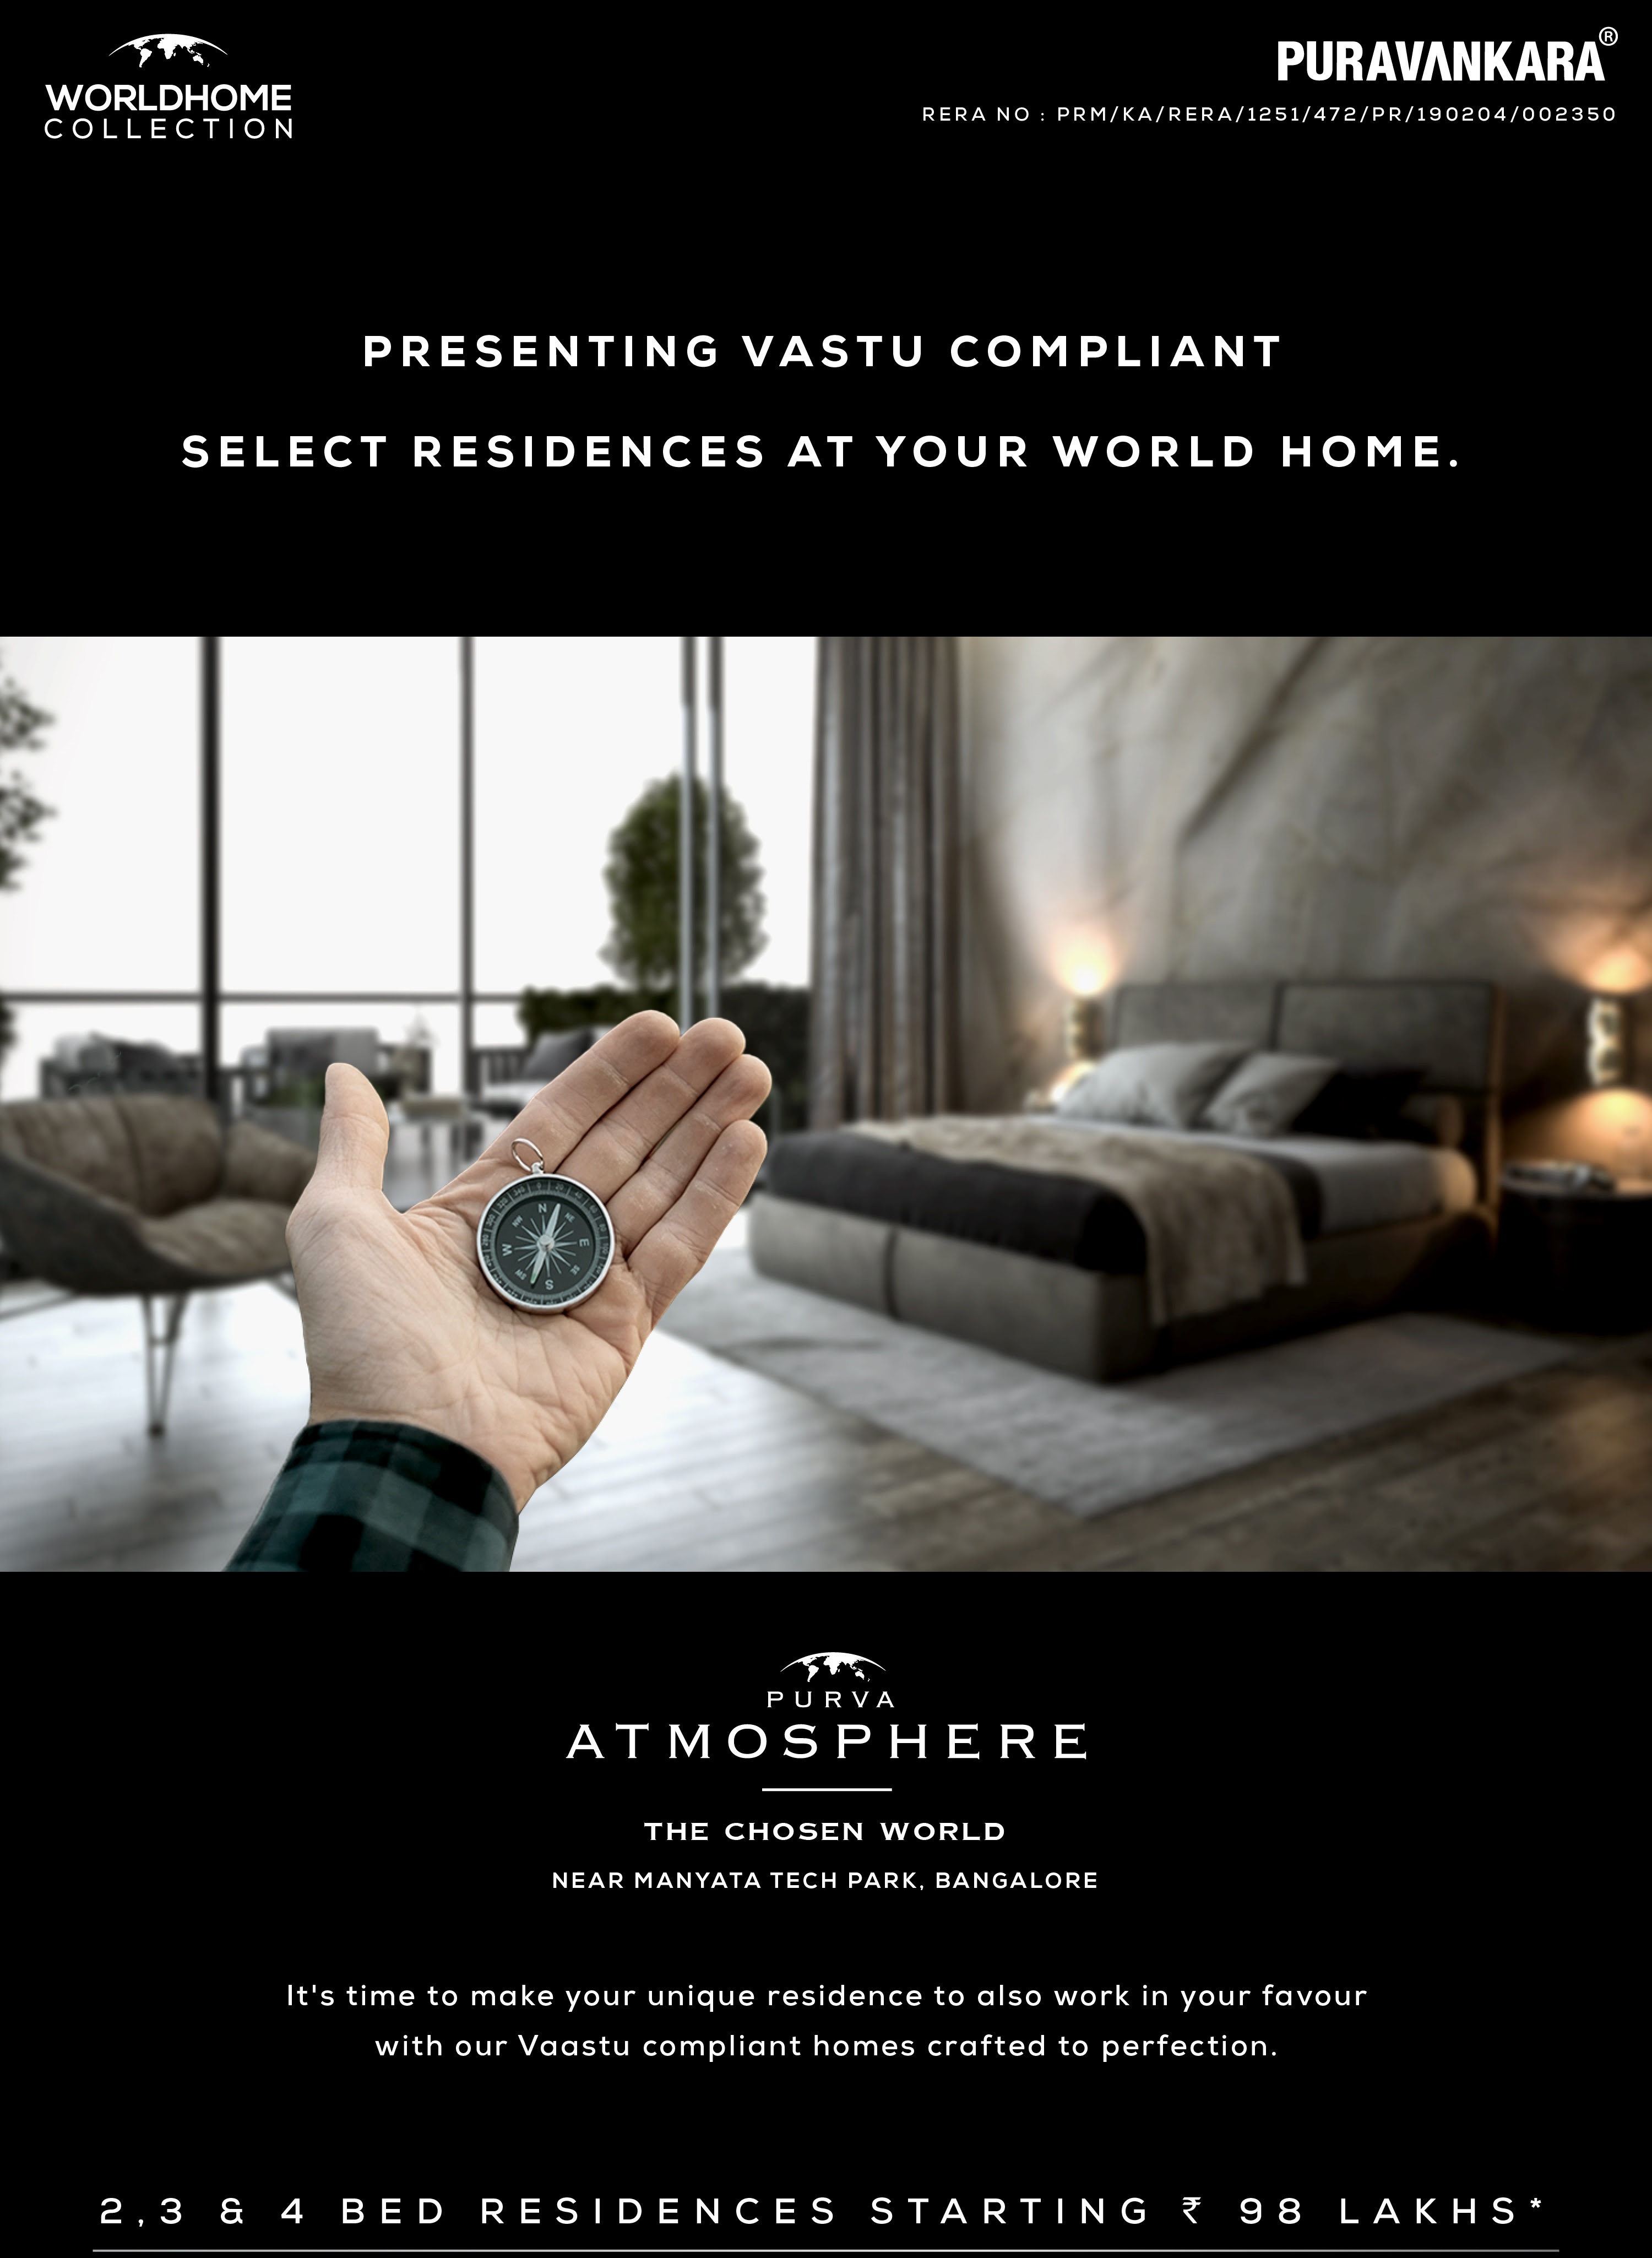 Presenting vastu compliant, select residences at your world home at Purva Atmosphere in Bangalore